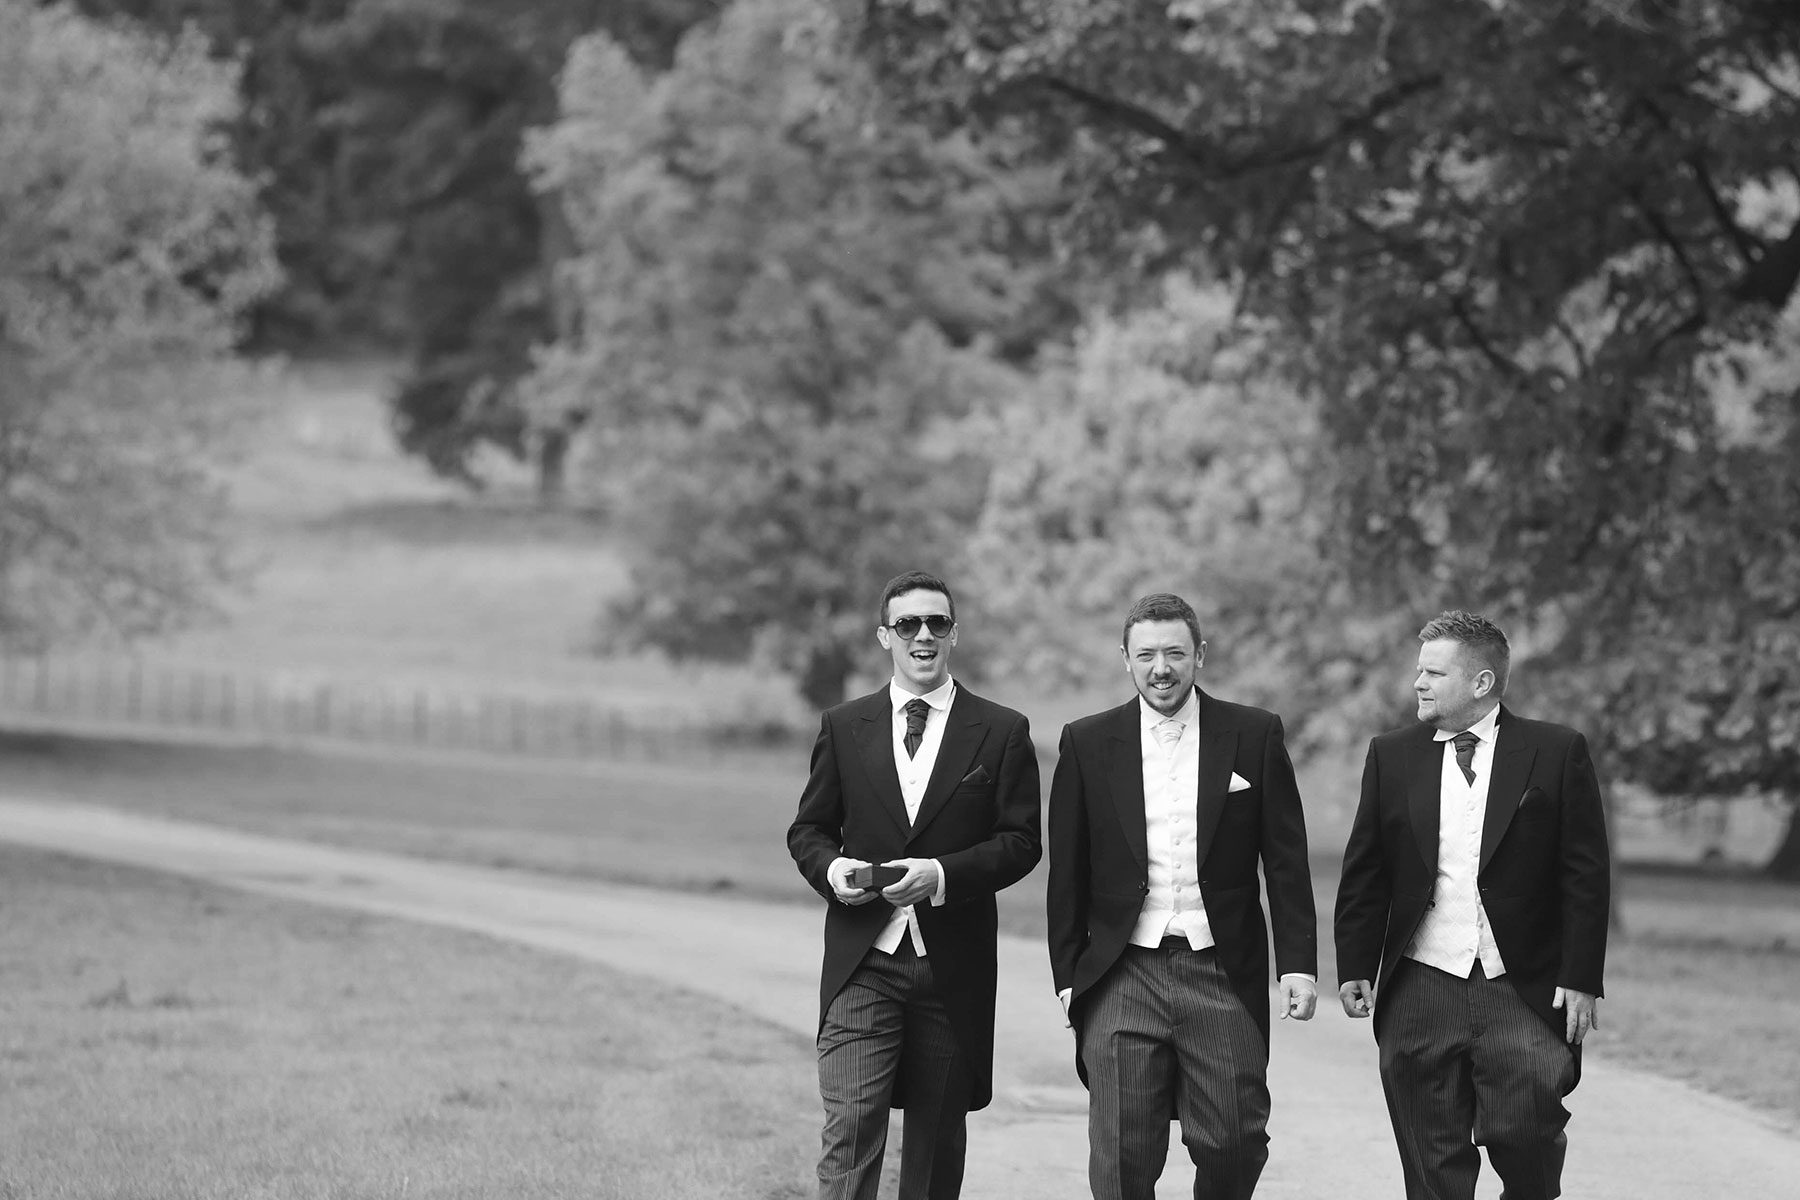 On their way to the church - Wedding Photographer at Dumbleton Hall | Bullit - Cheltenham & Cotswolds